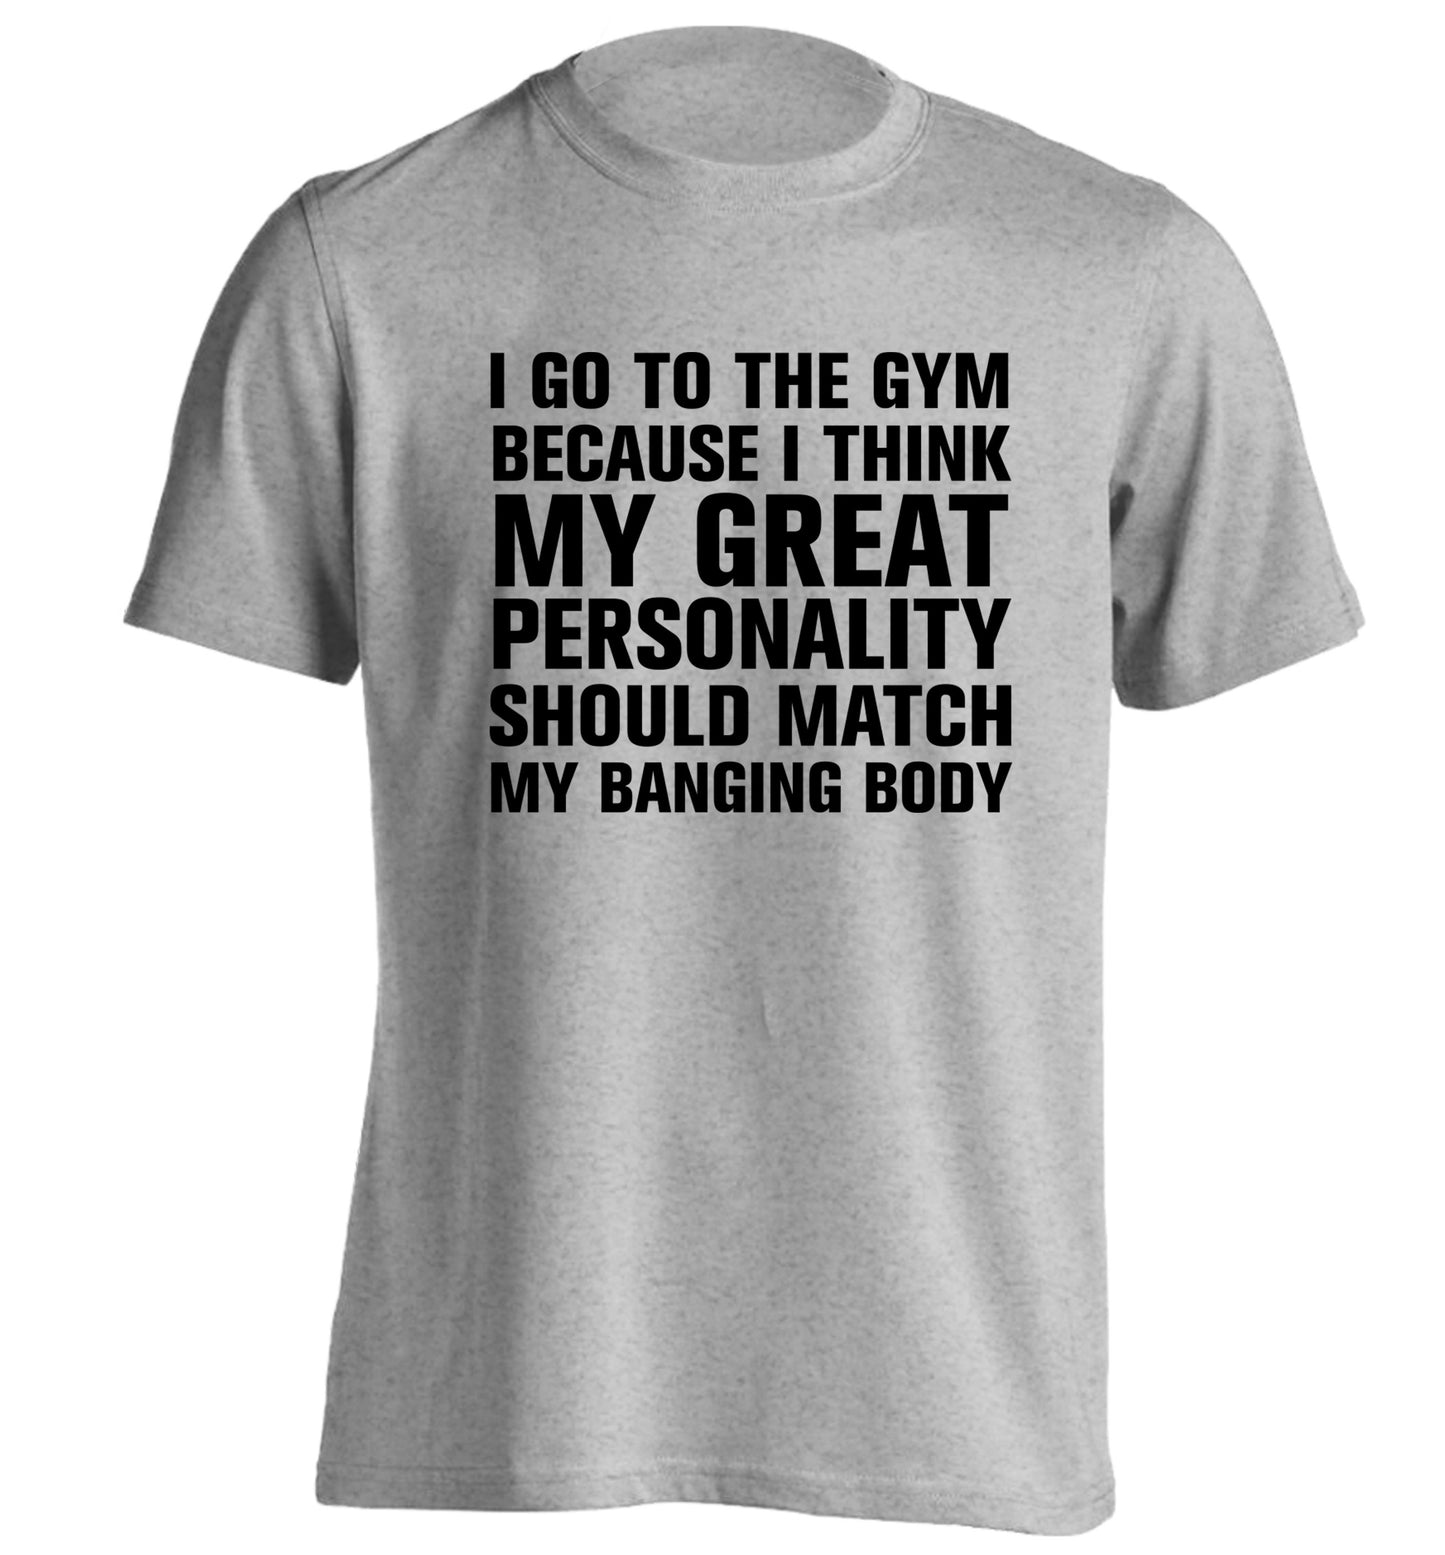 I go to the gym because I think my great personality should match my banging body adults unisex grey Tshirt 2XL